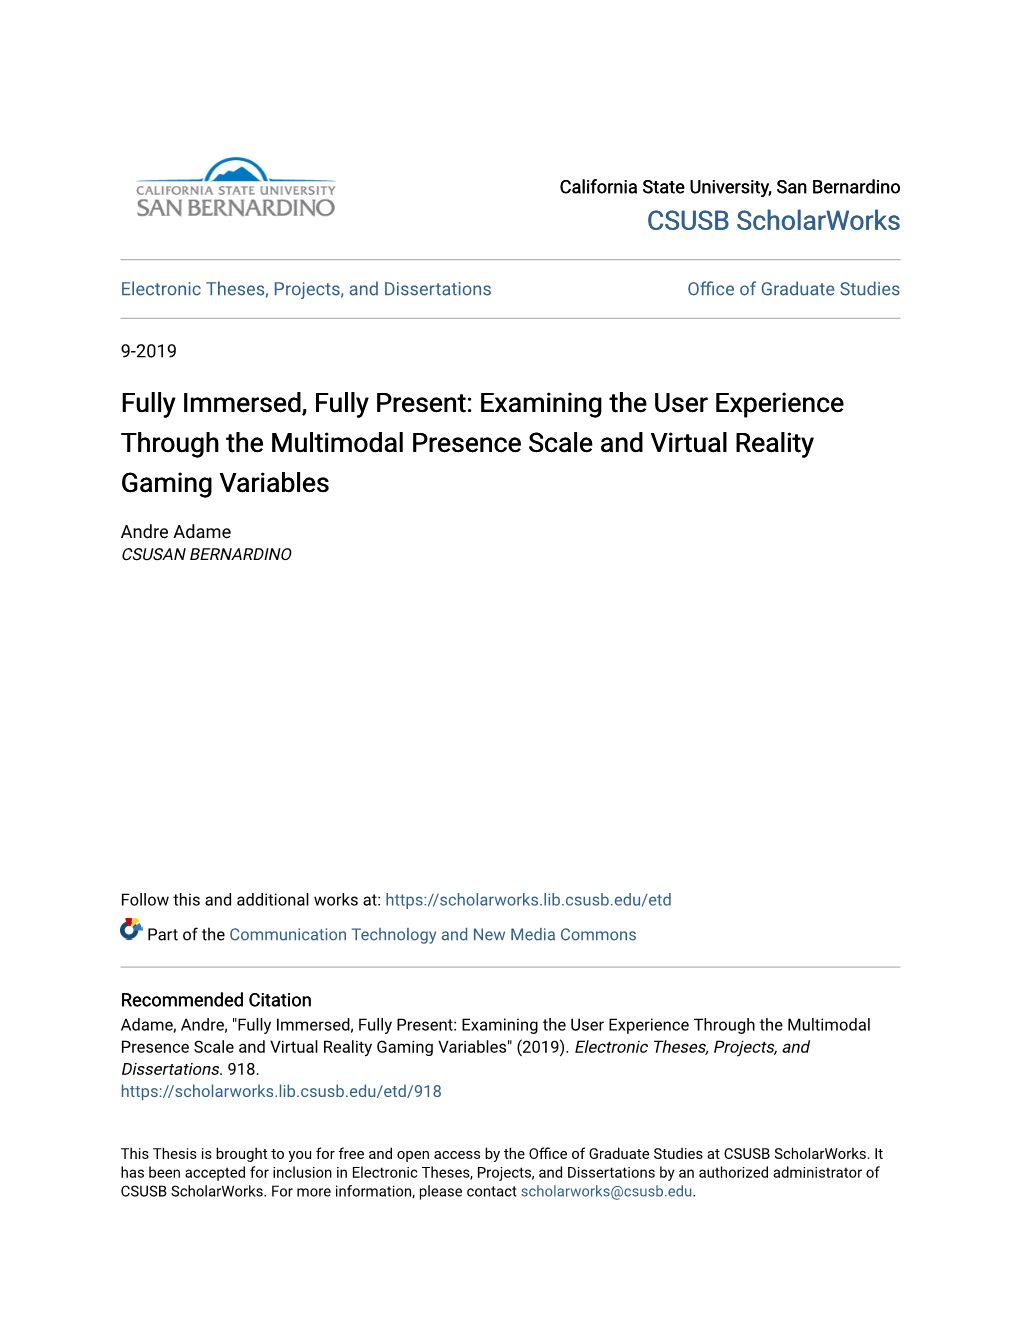 Examining the User Experience Through the Multimodal Presence Scale and Virtual Reality Gaming Variables